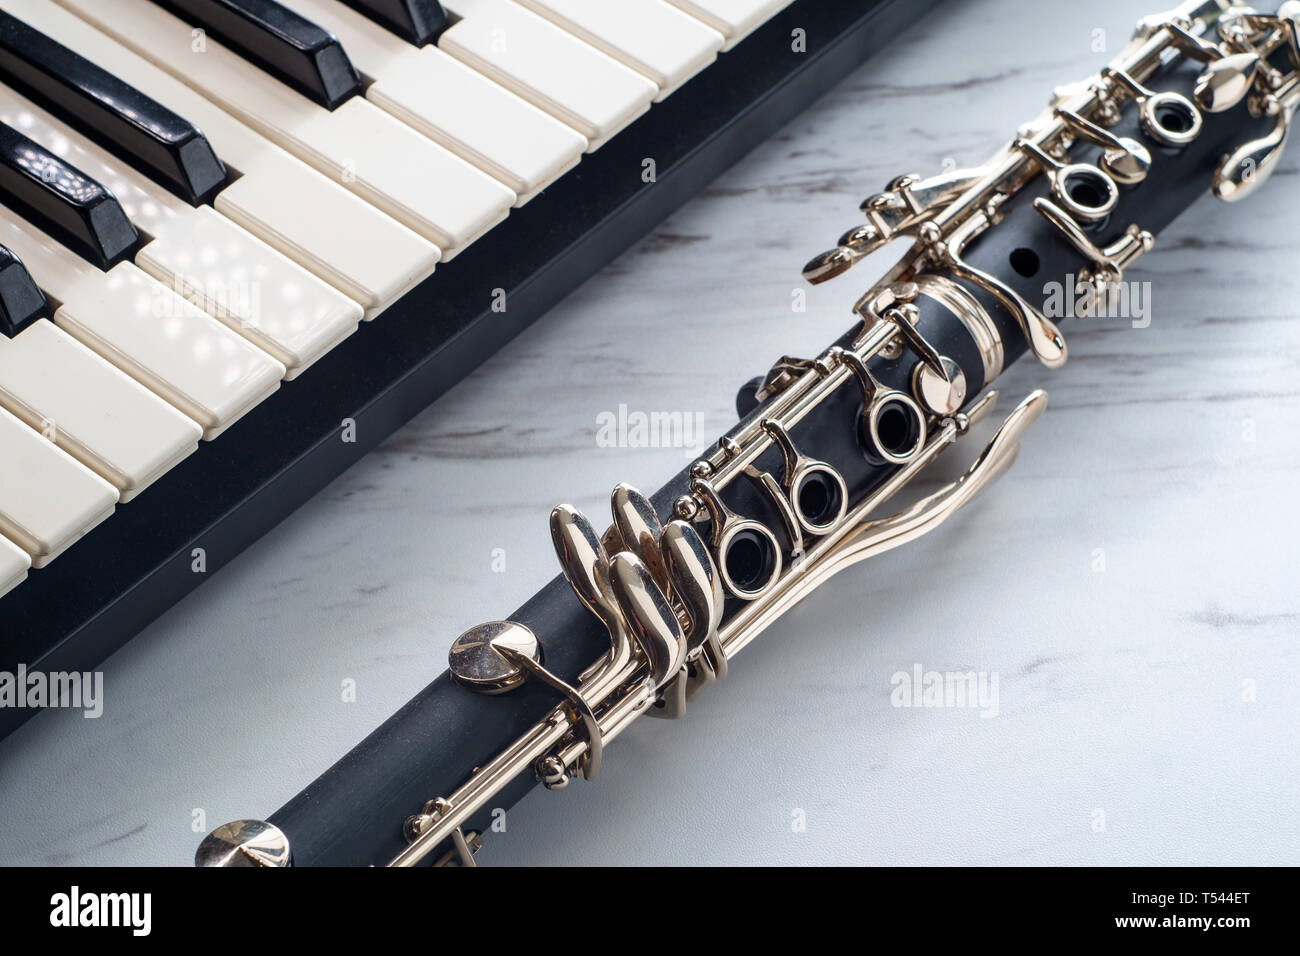 Rusty old classical clarinet on marble table next to electric piano  keyboard Stock Photo - Alamy